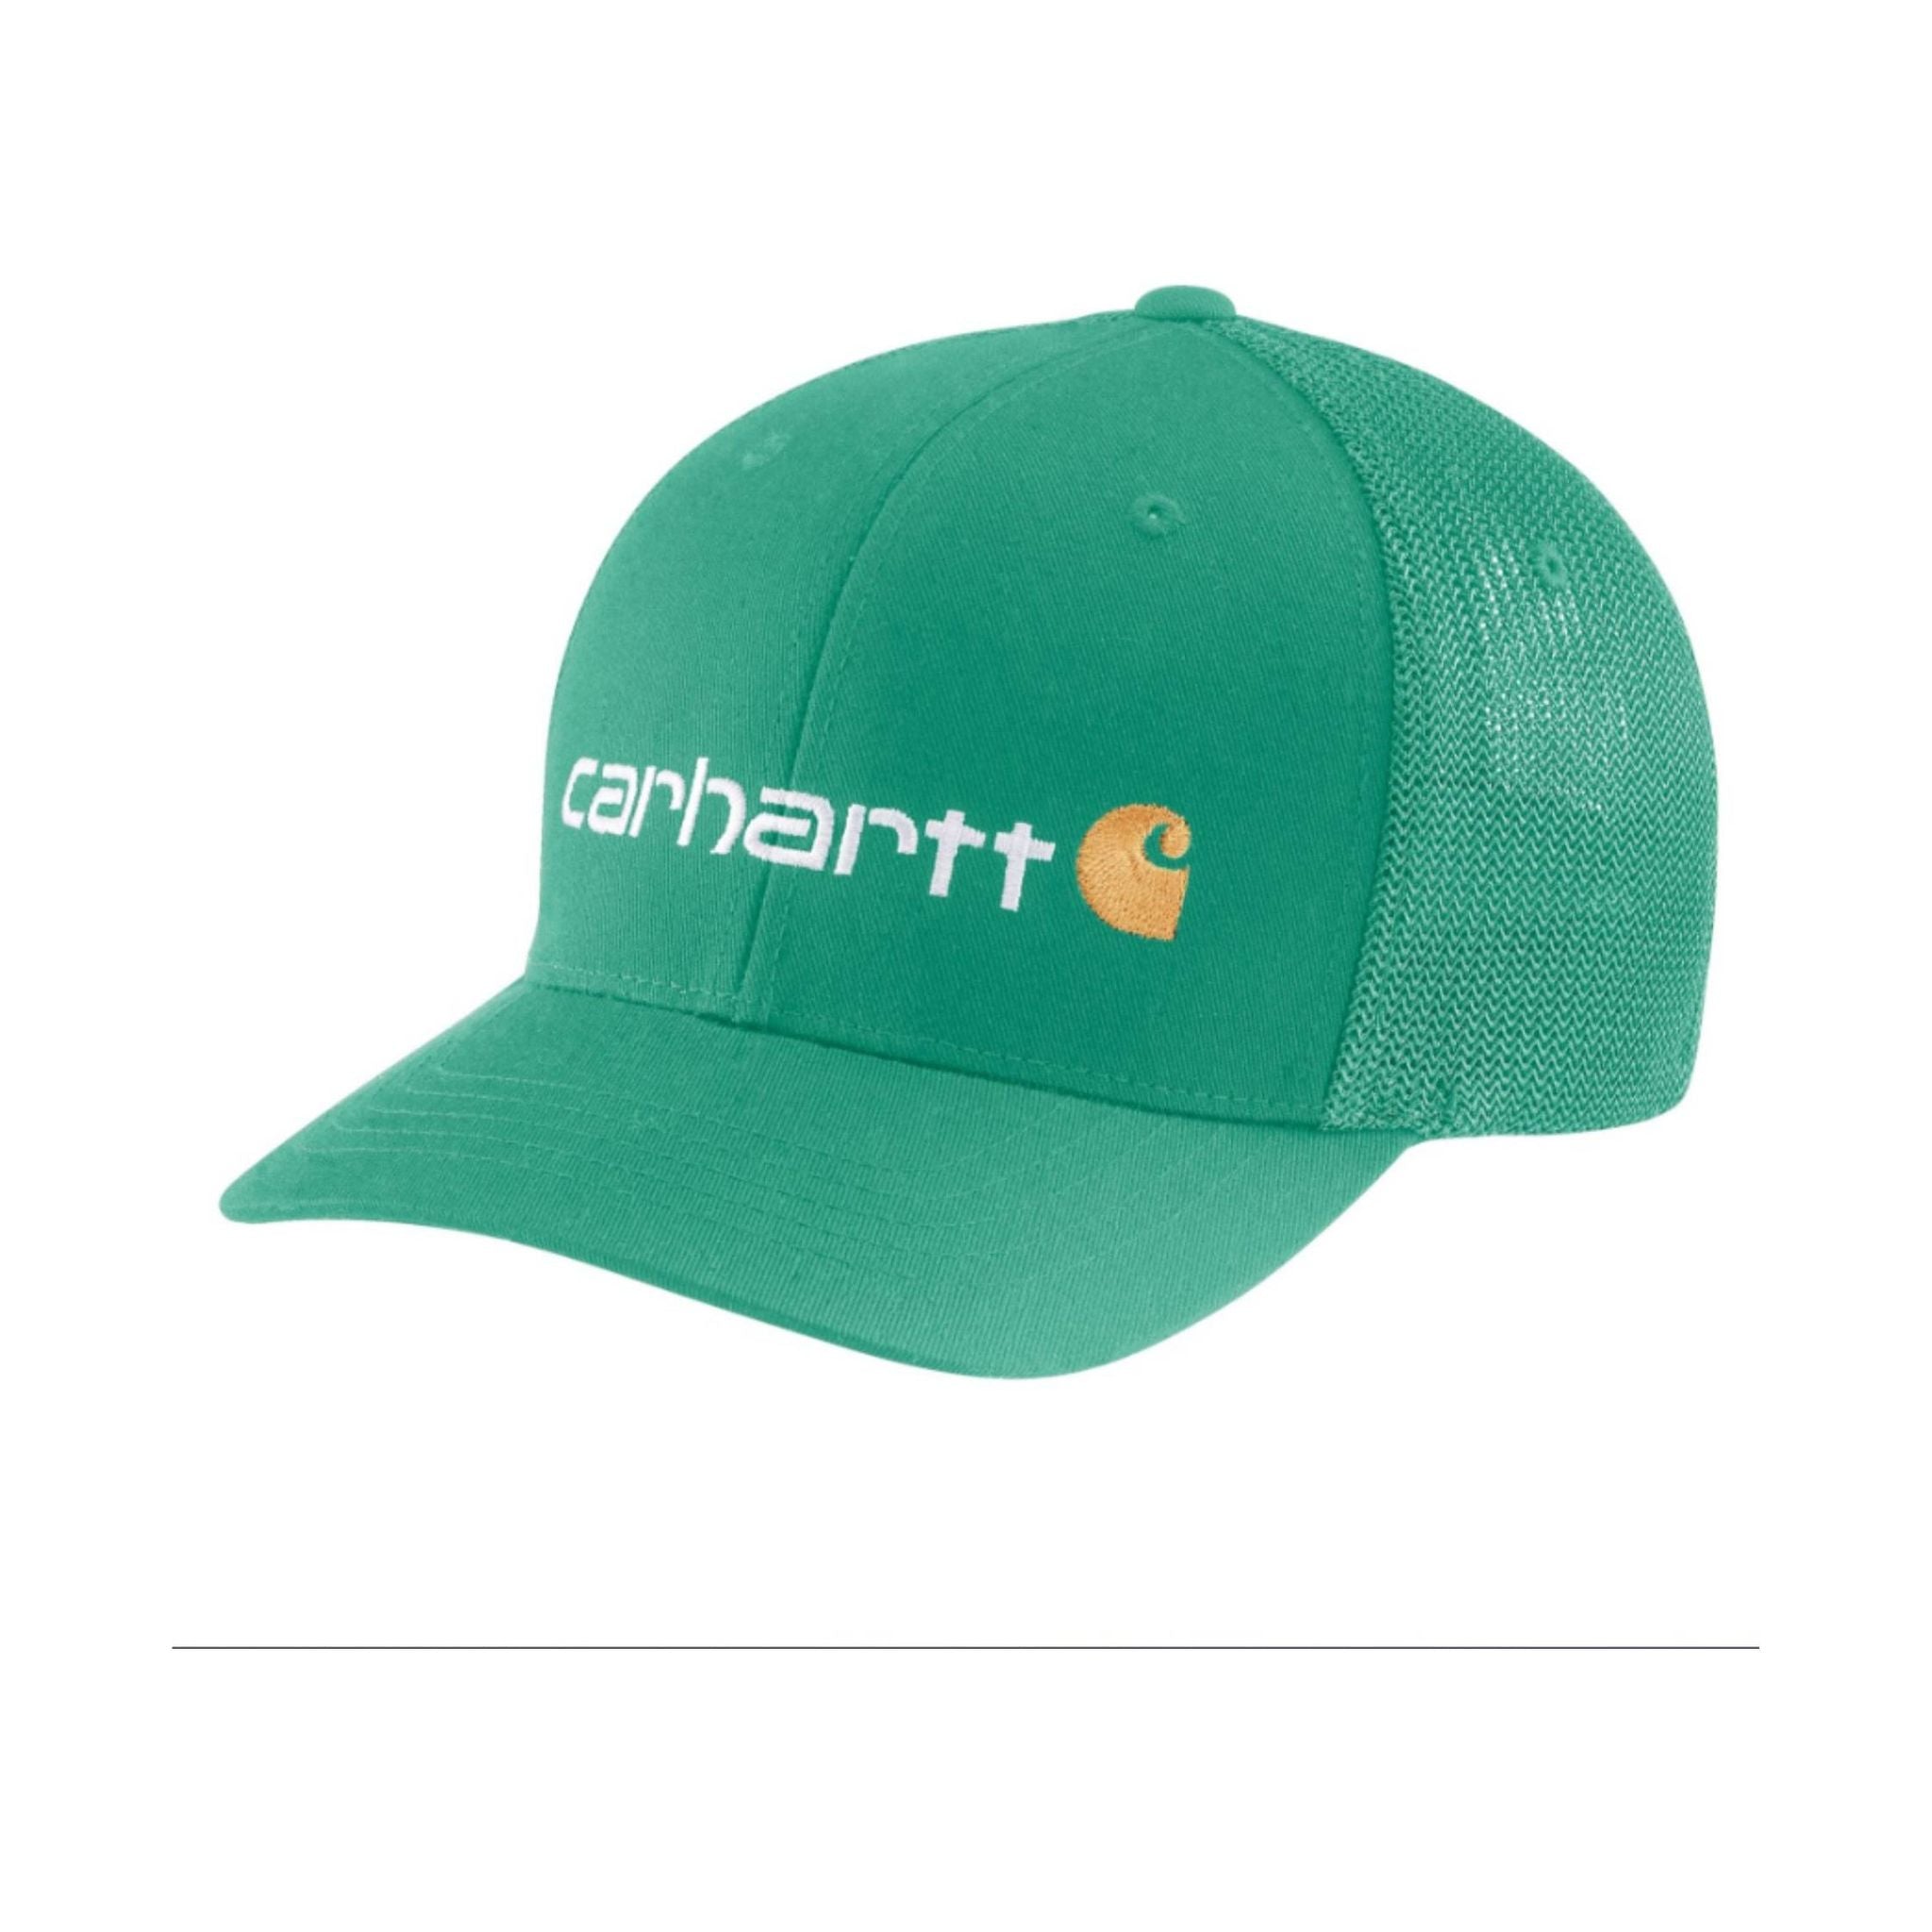 Carhartt Rugged Flex Fitted Canvas Mesh Back Logo Graphic Cap - Seagreen